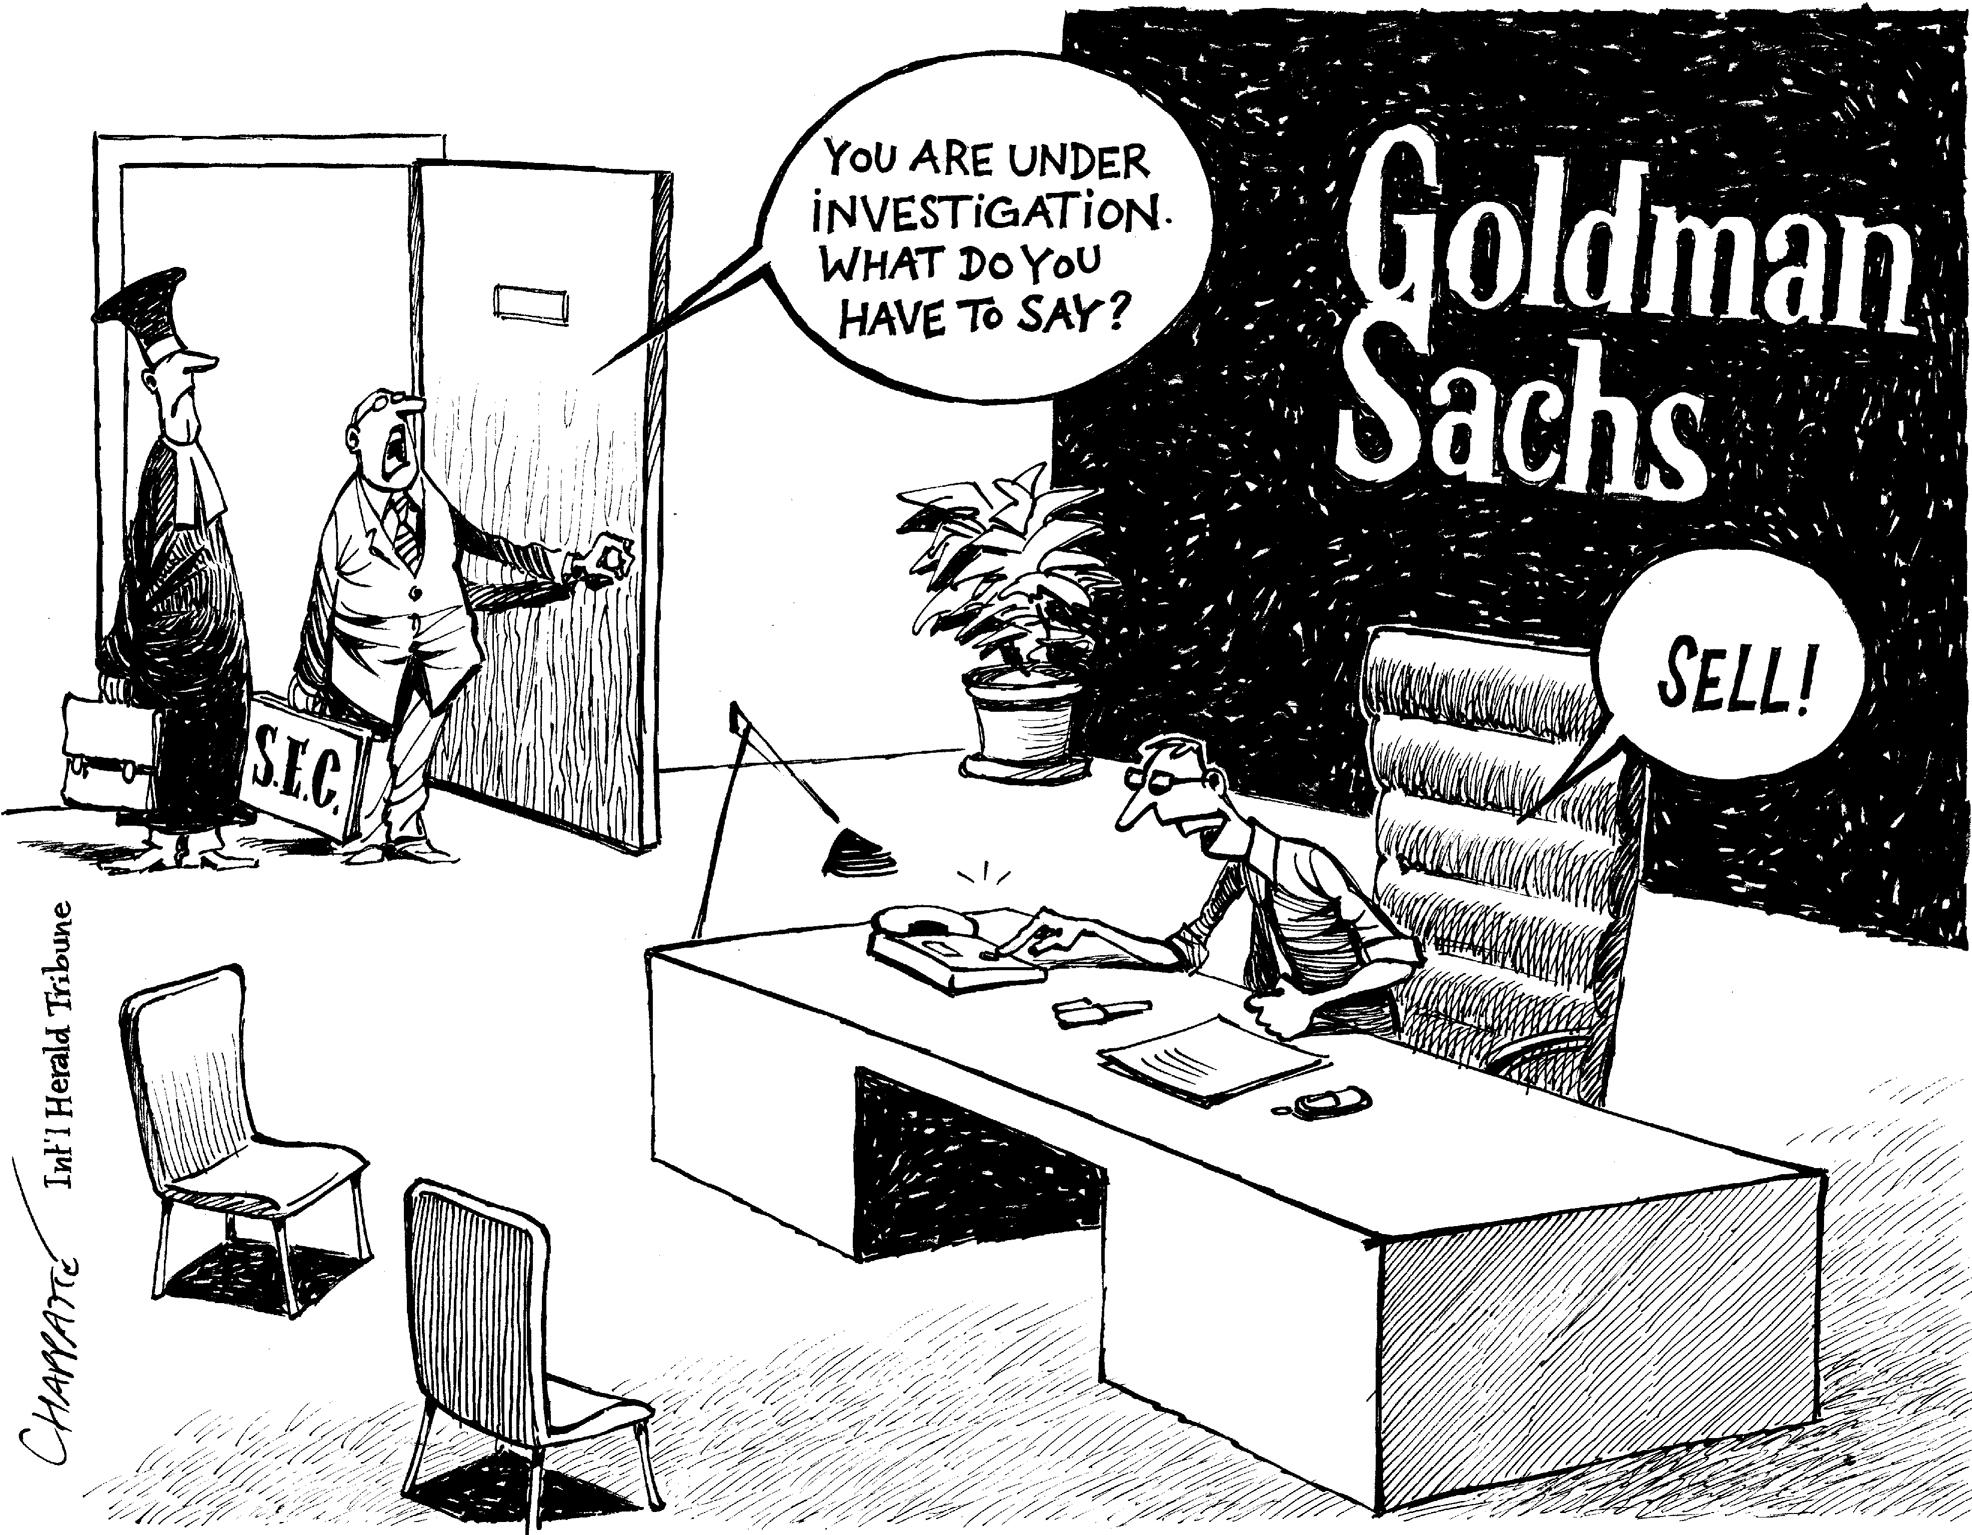 Goldman Faces Fraud Charges